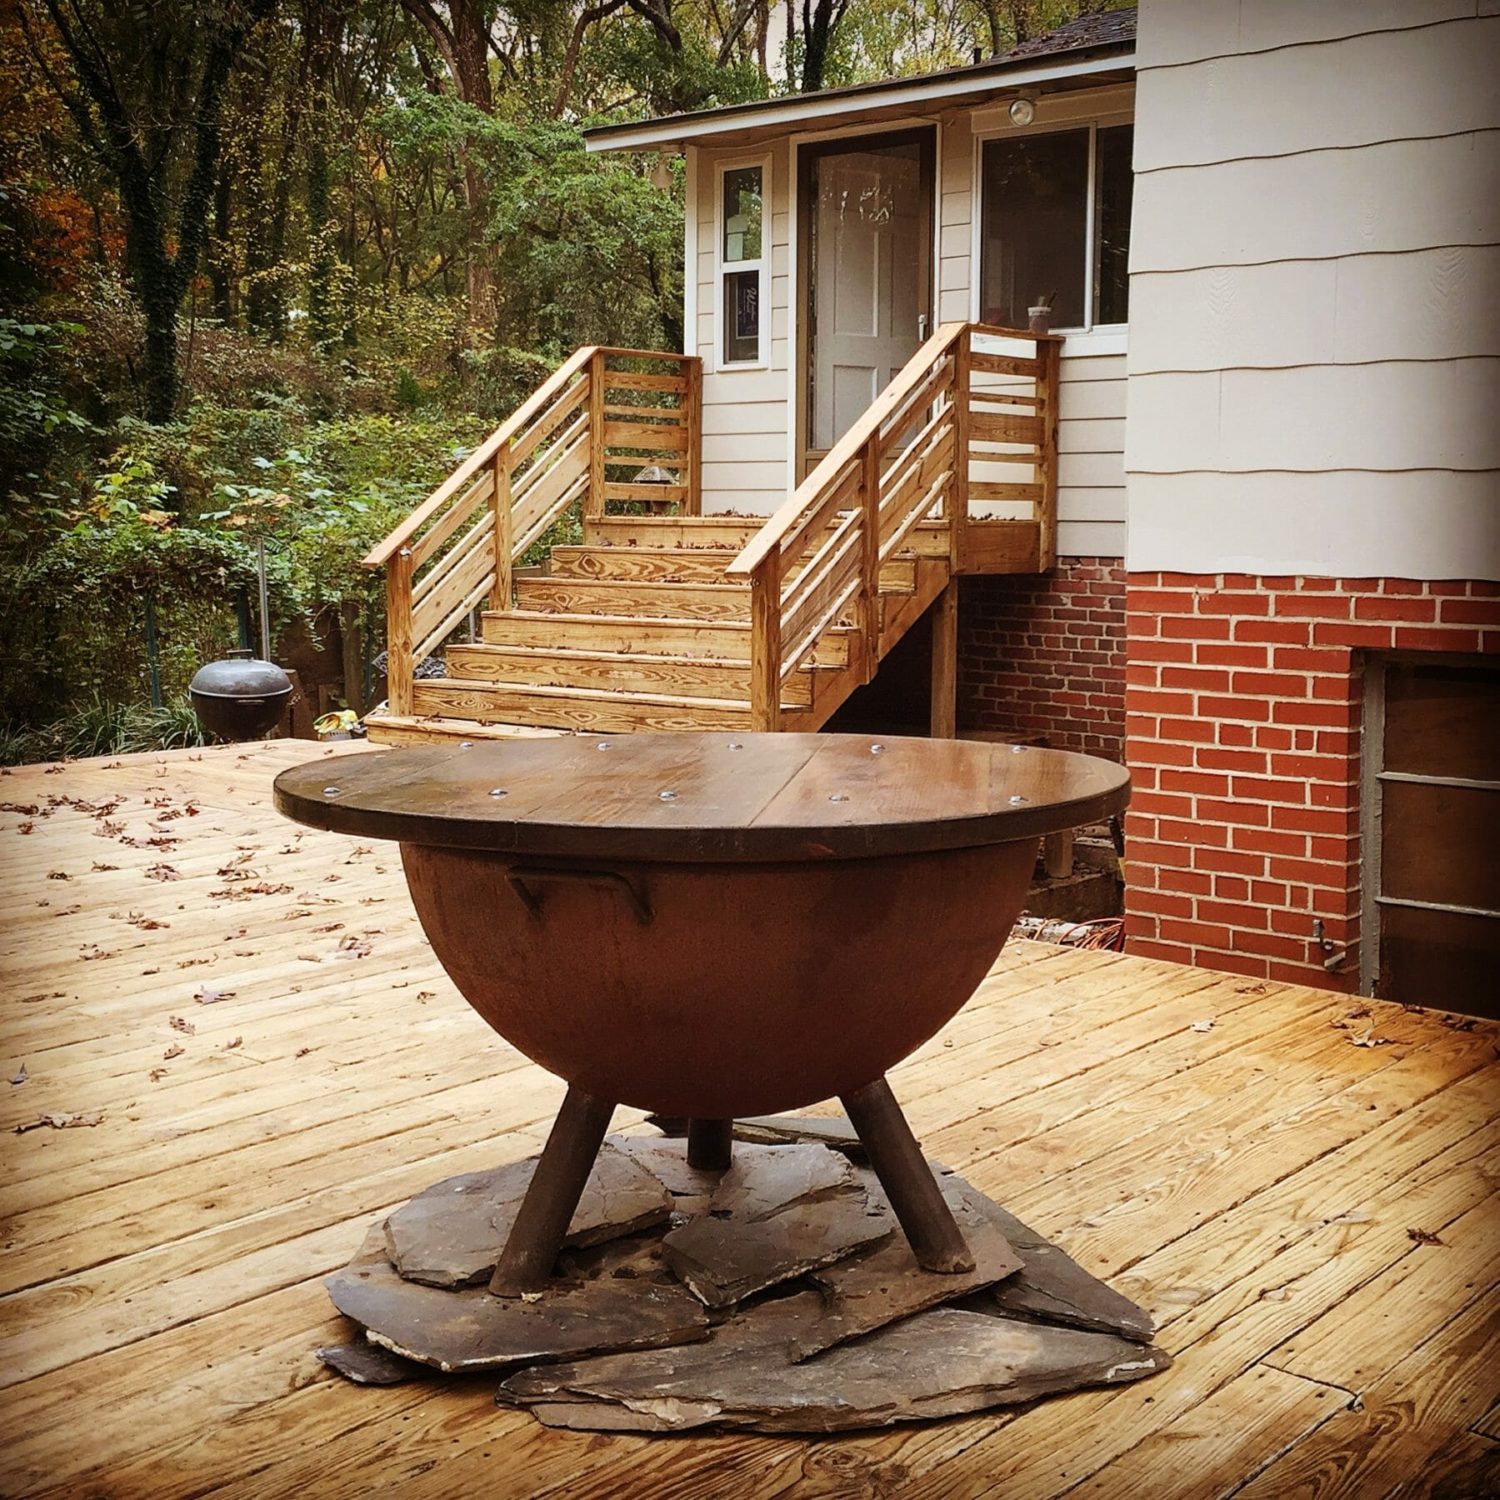 Wooden Decks Fire Pit Safety, Fire Pit For Deck Use